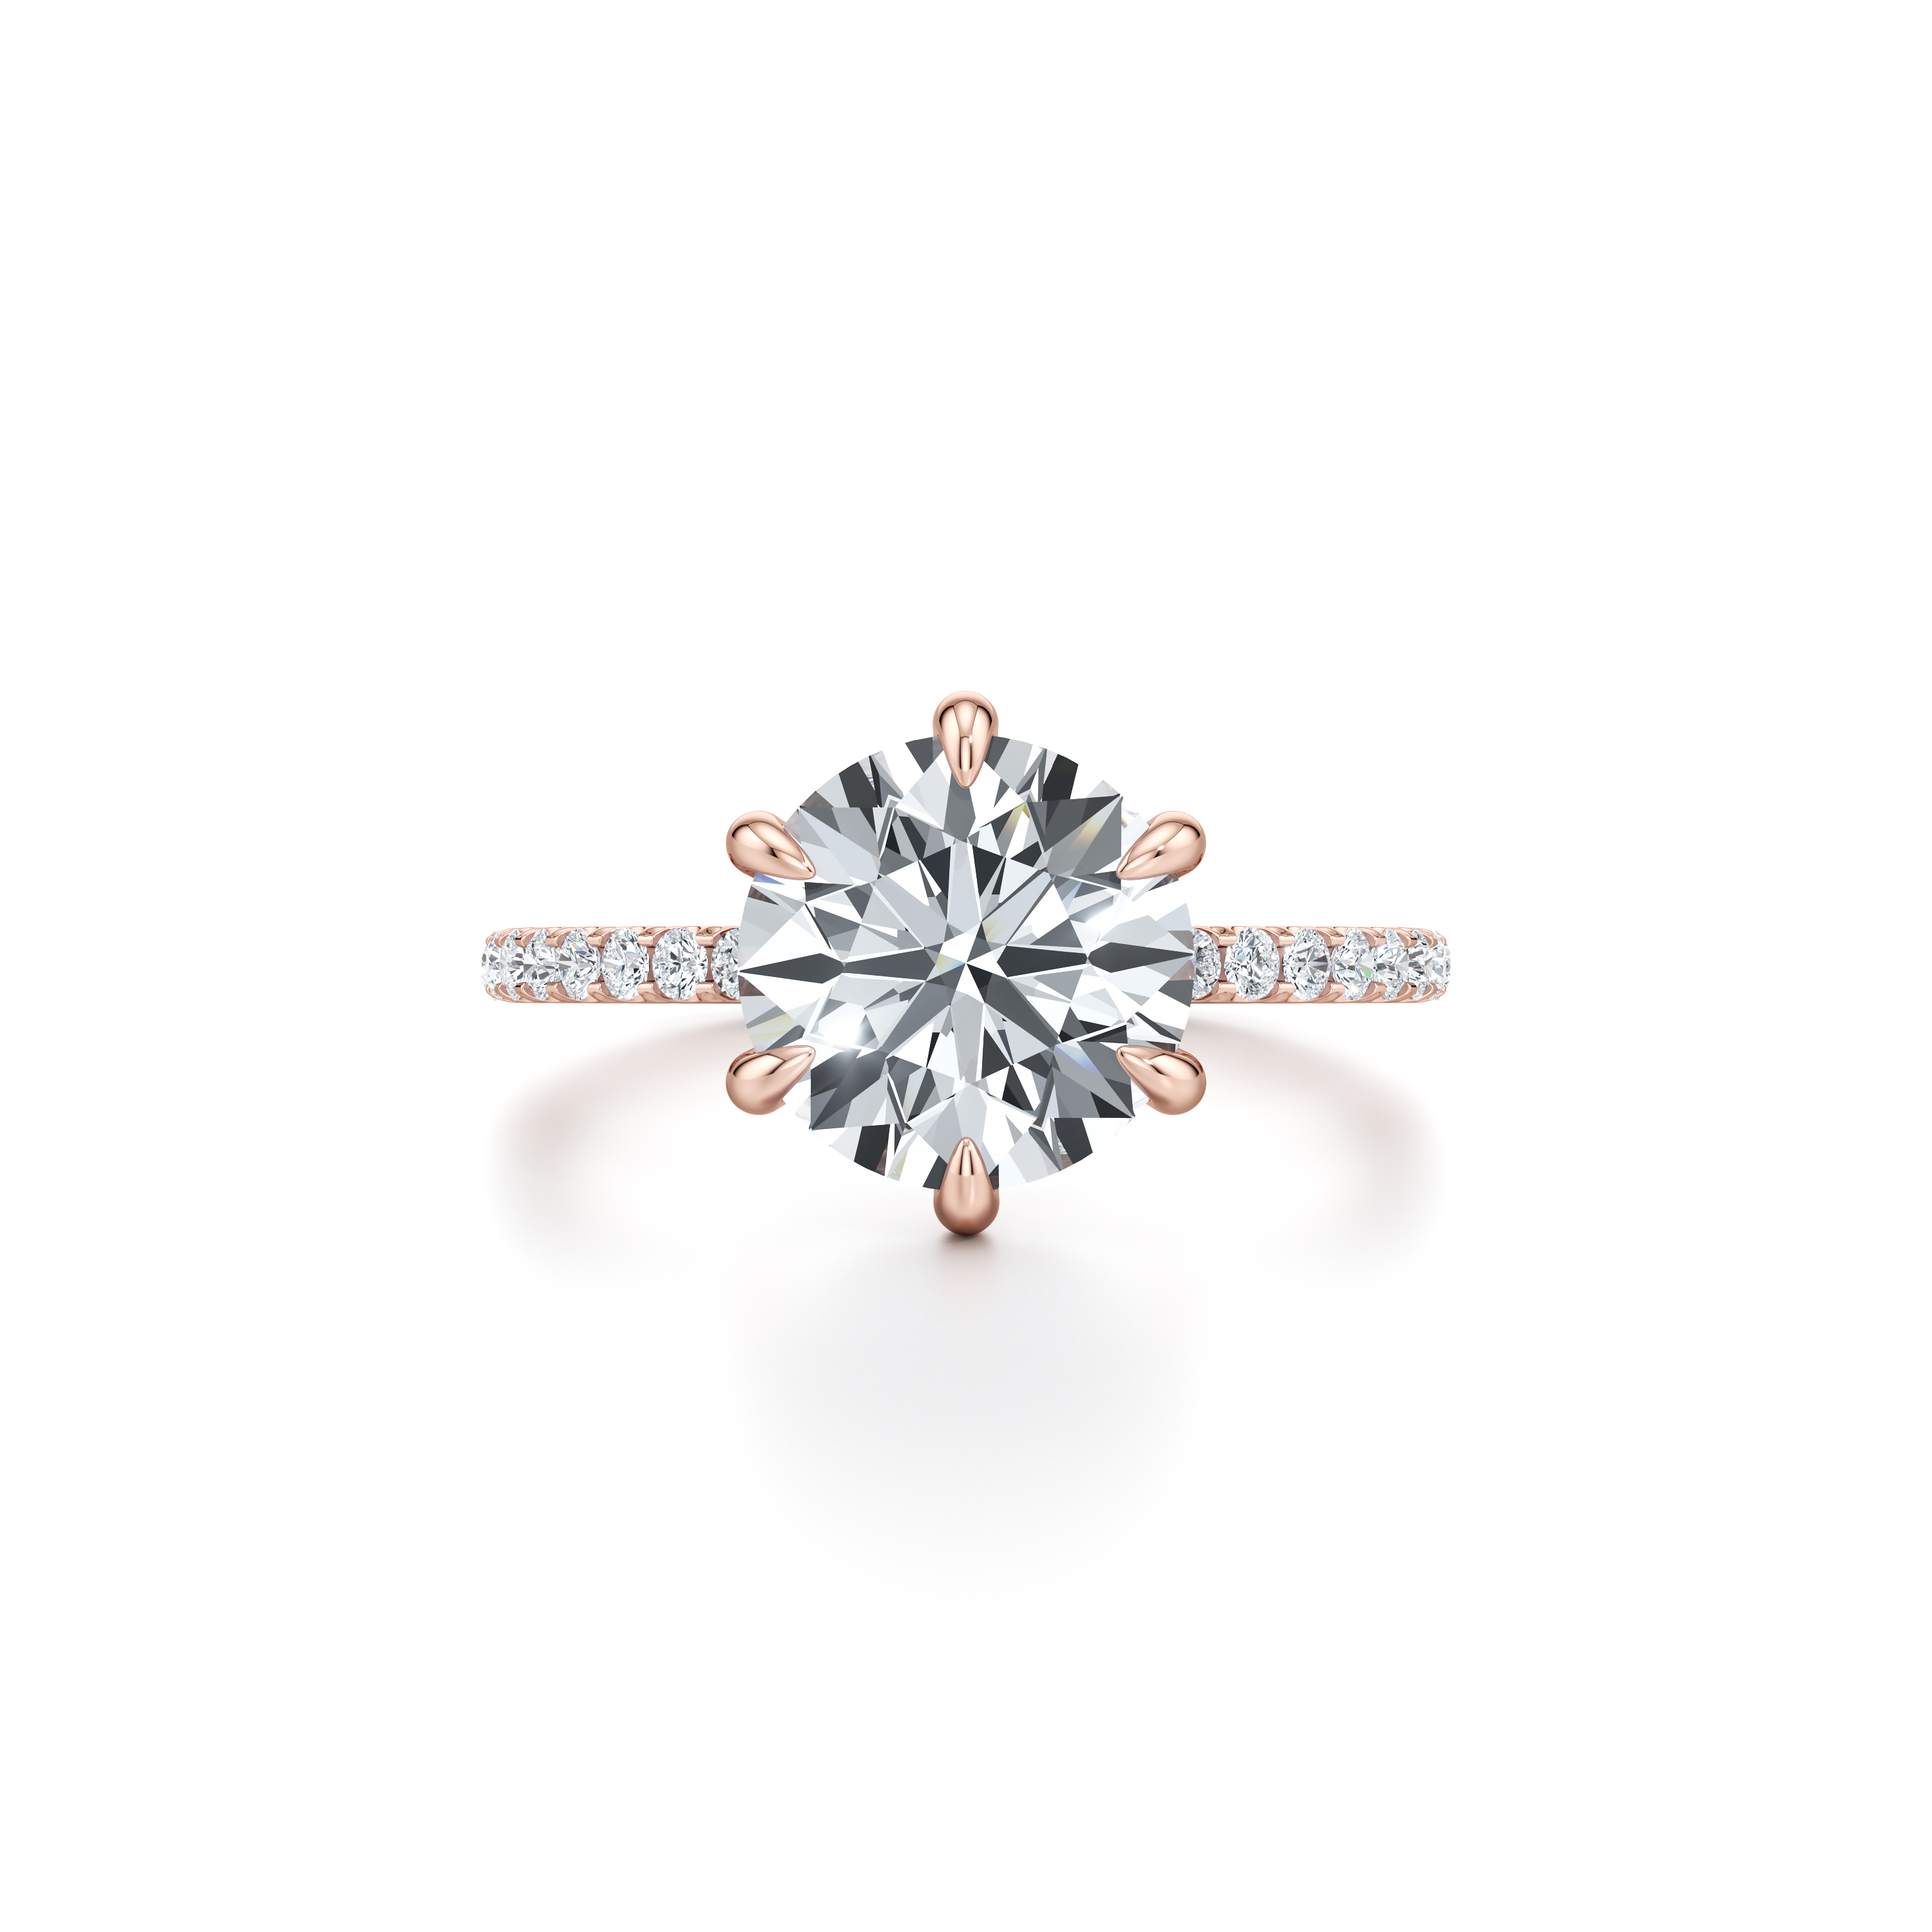 The Audrey Engagement Ring